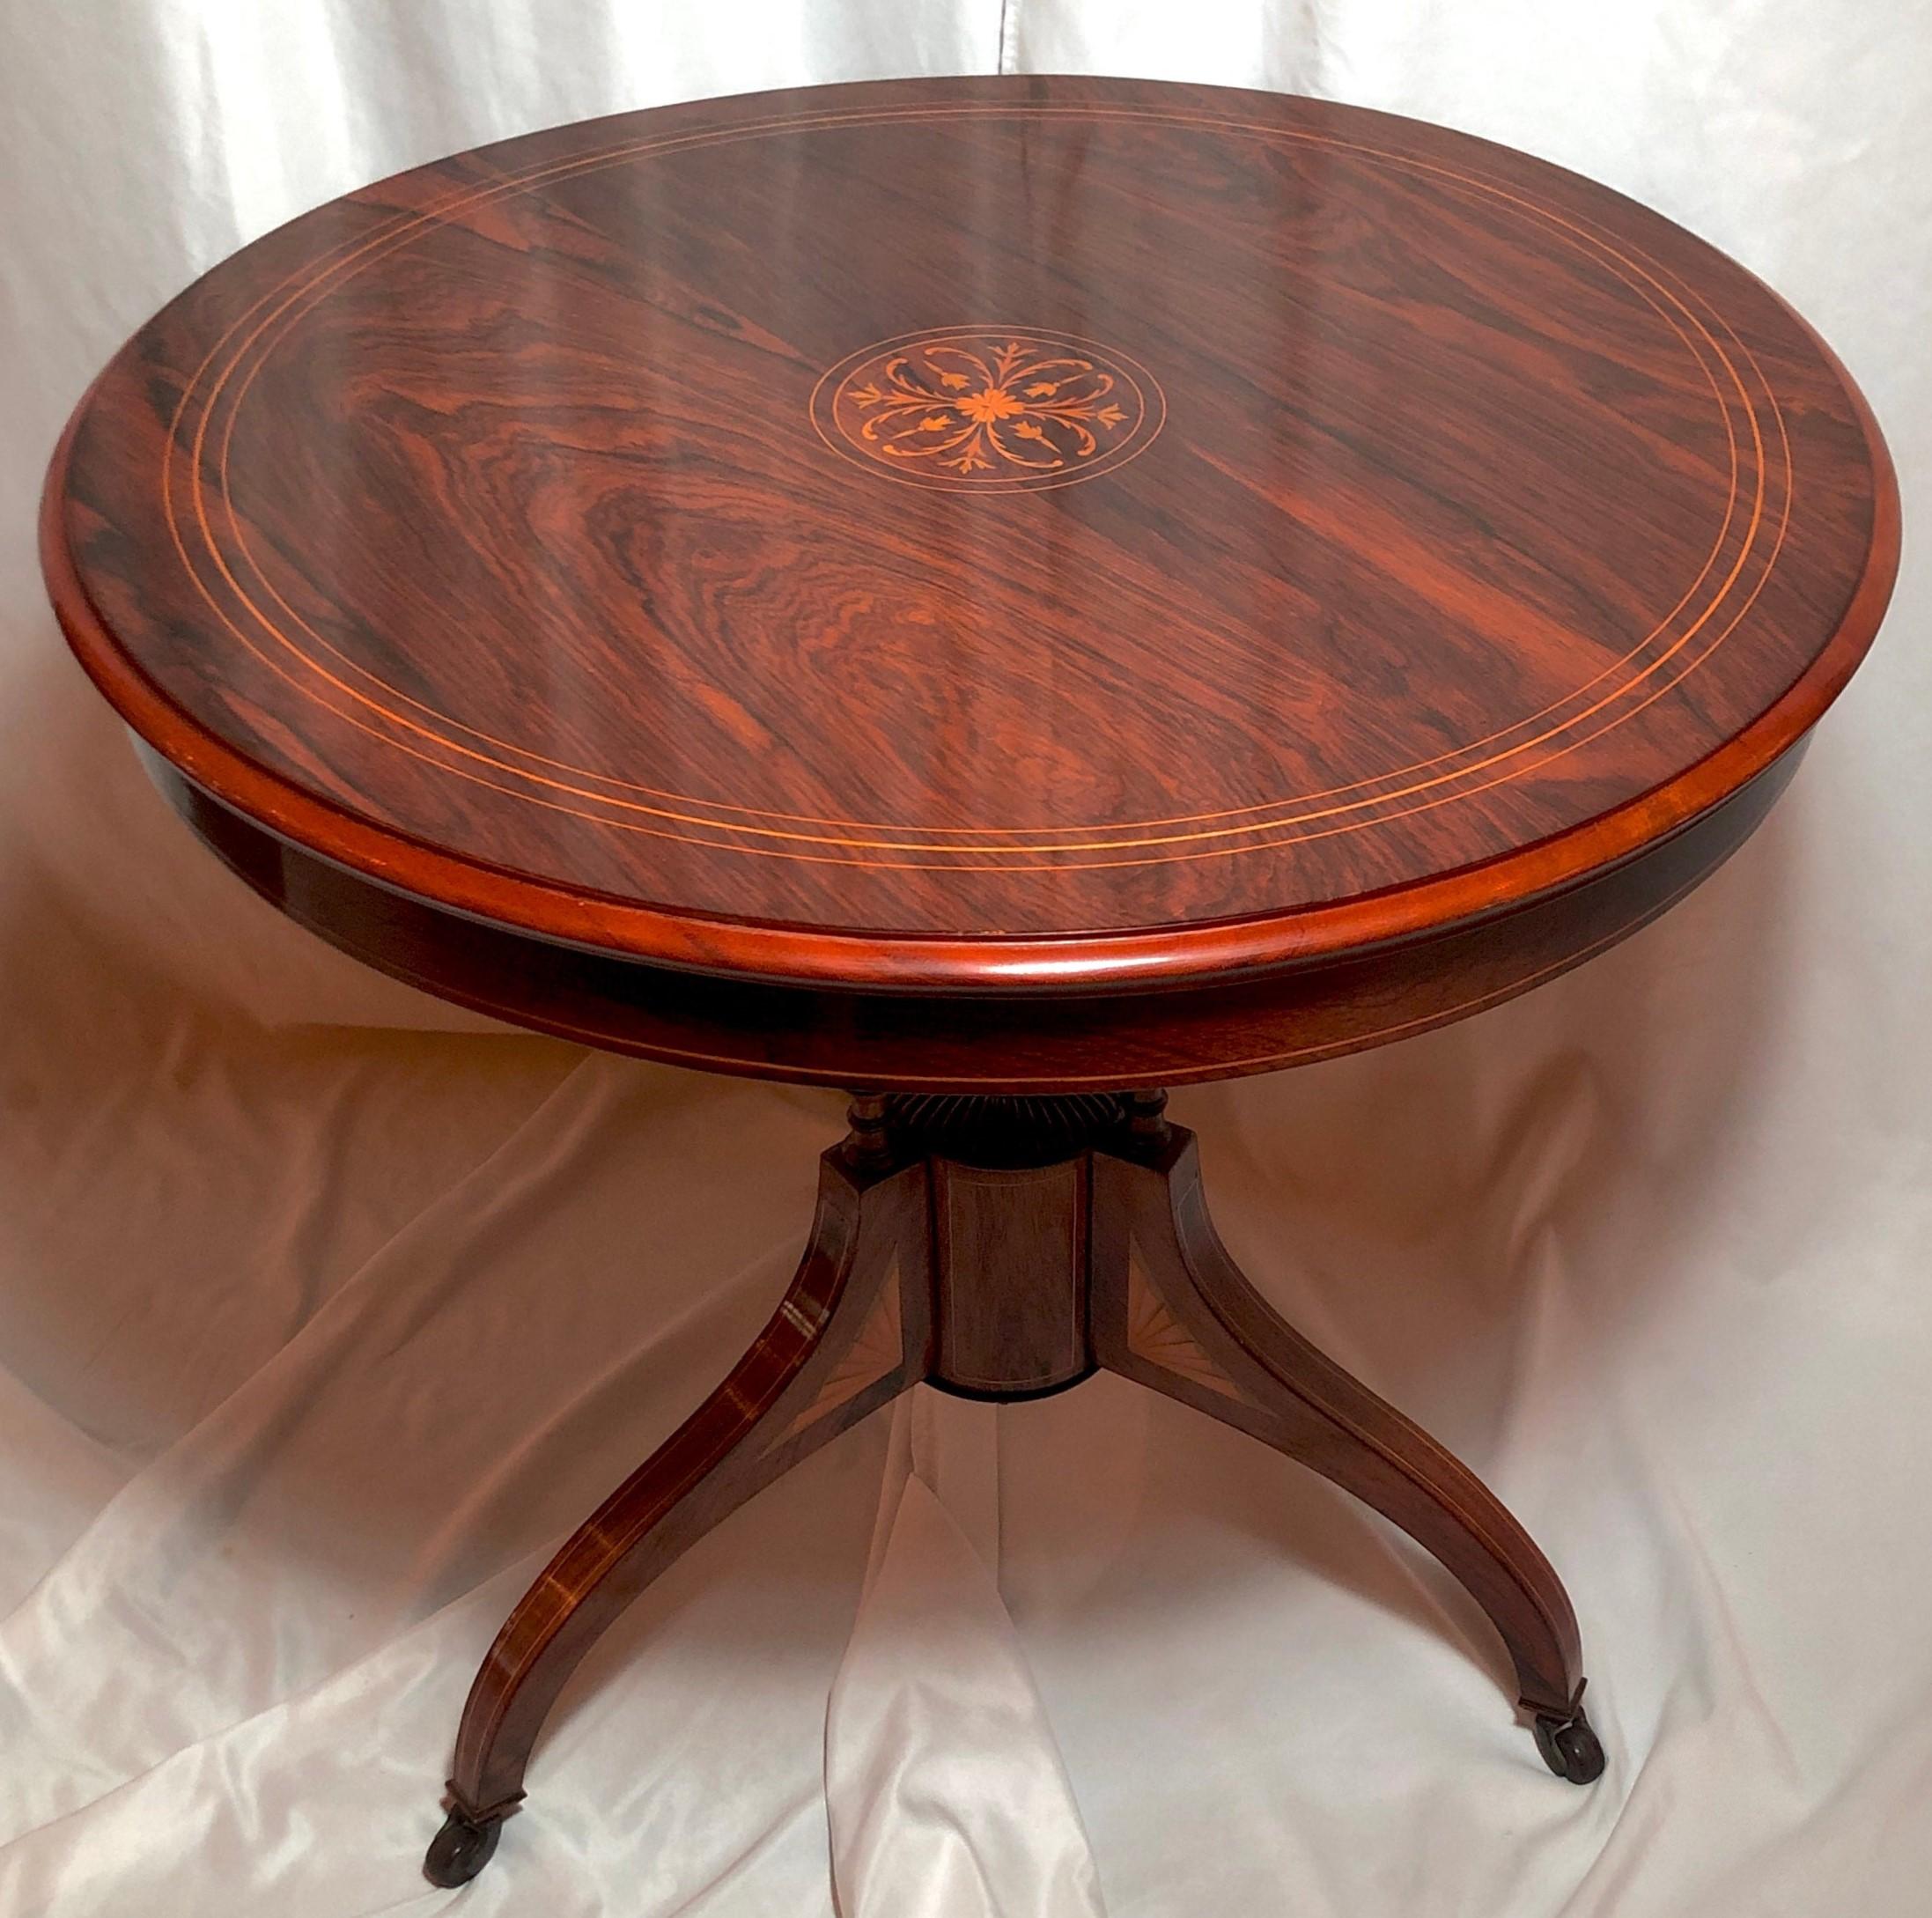 Antique english Victorian rosewood table with inlay, Circa 1860- 1870.